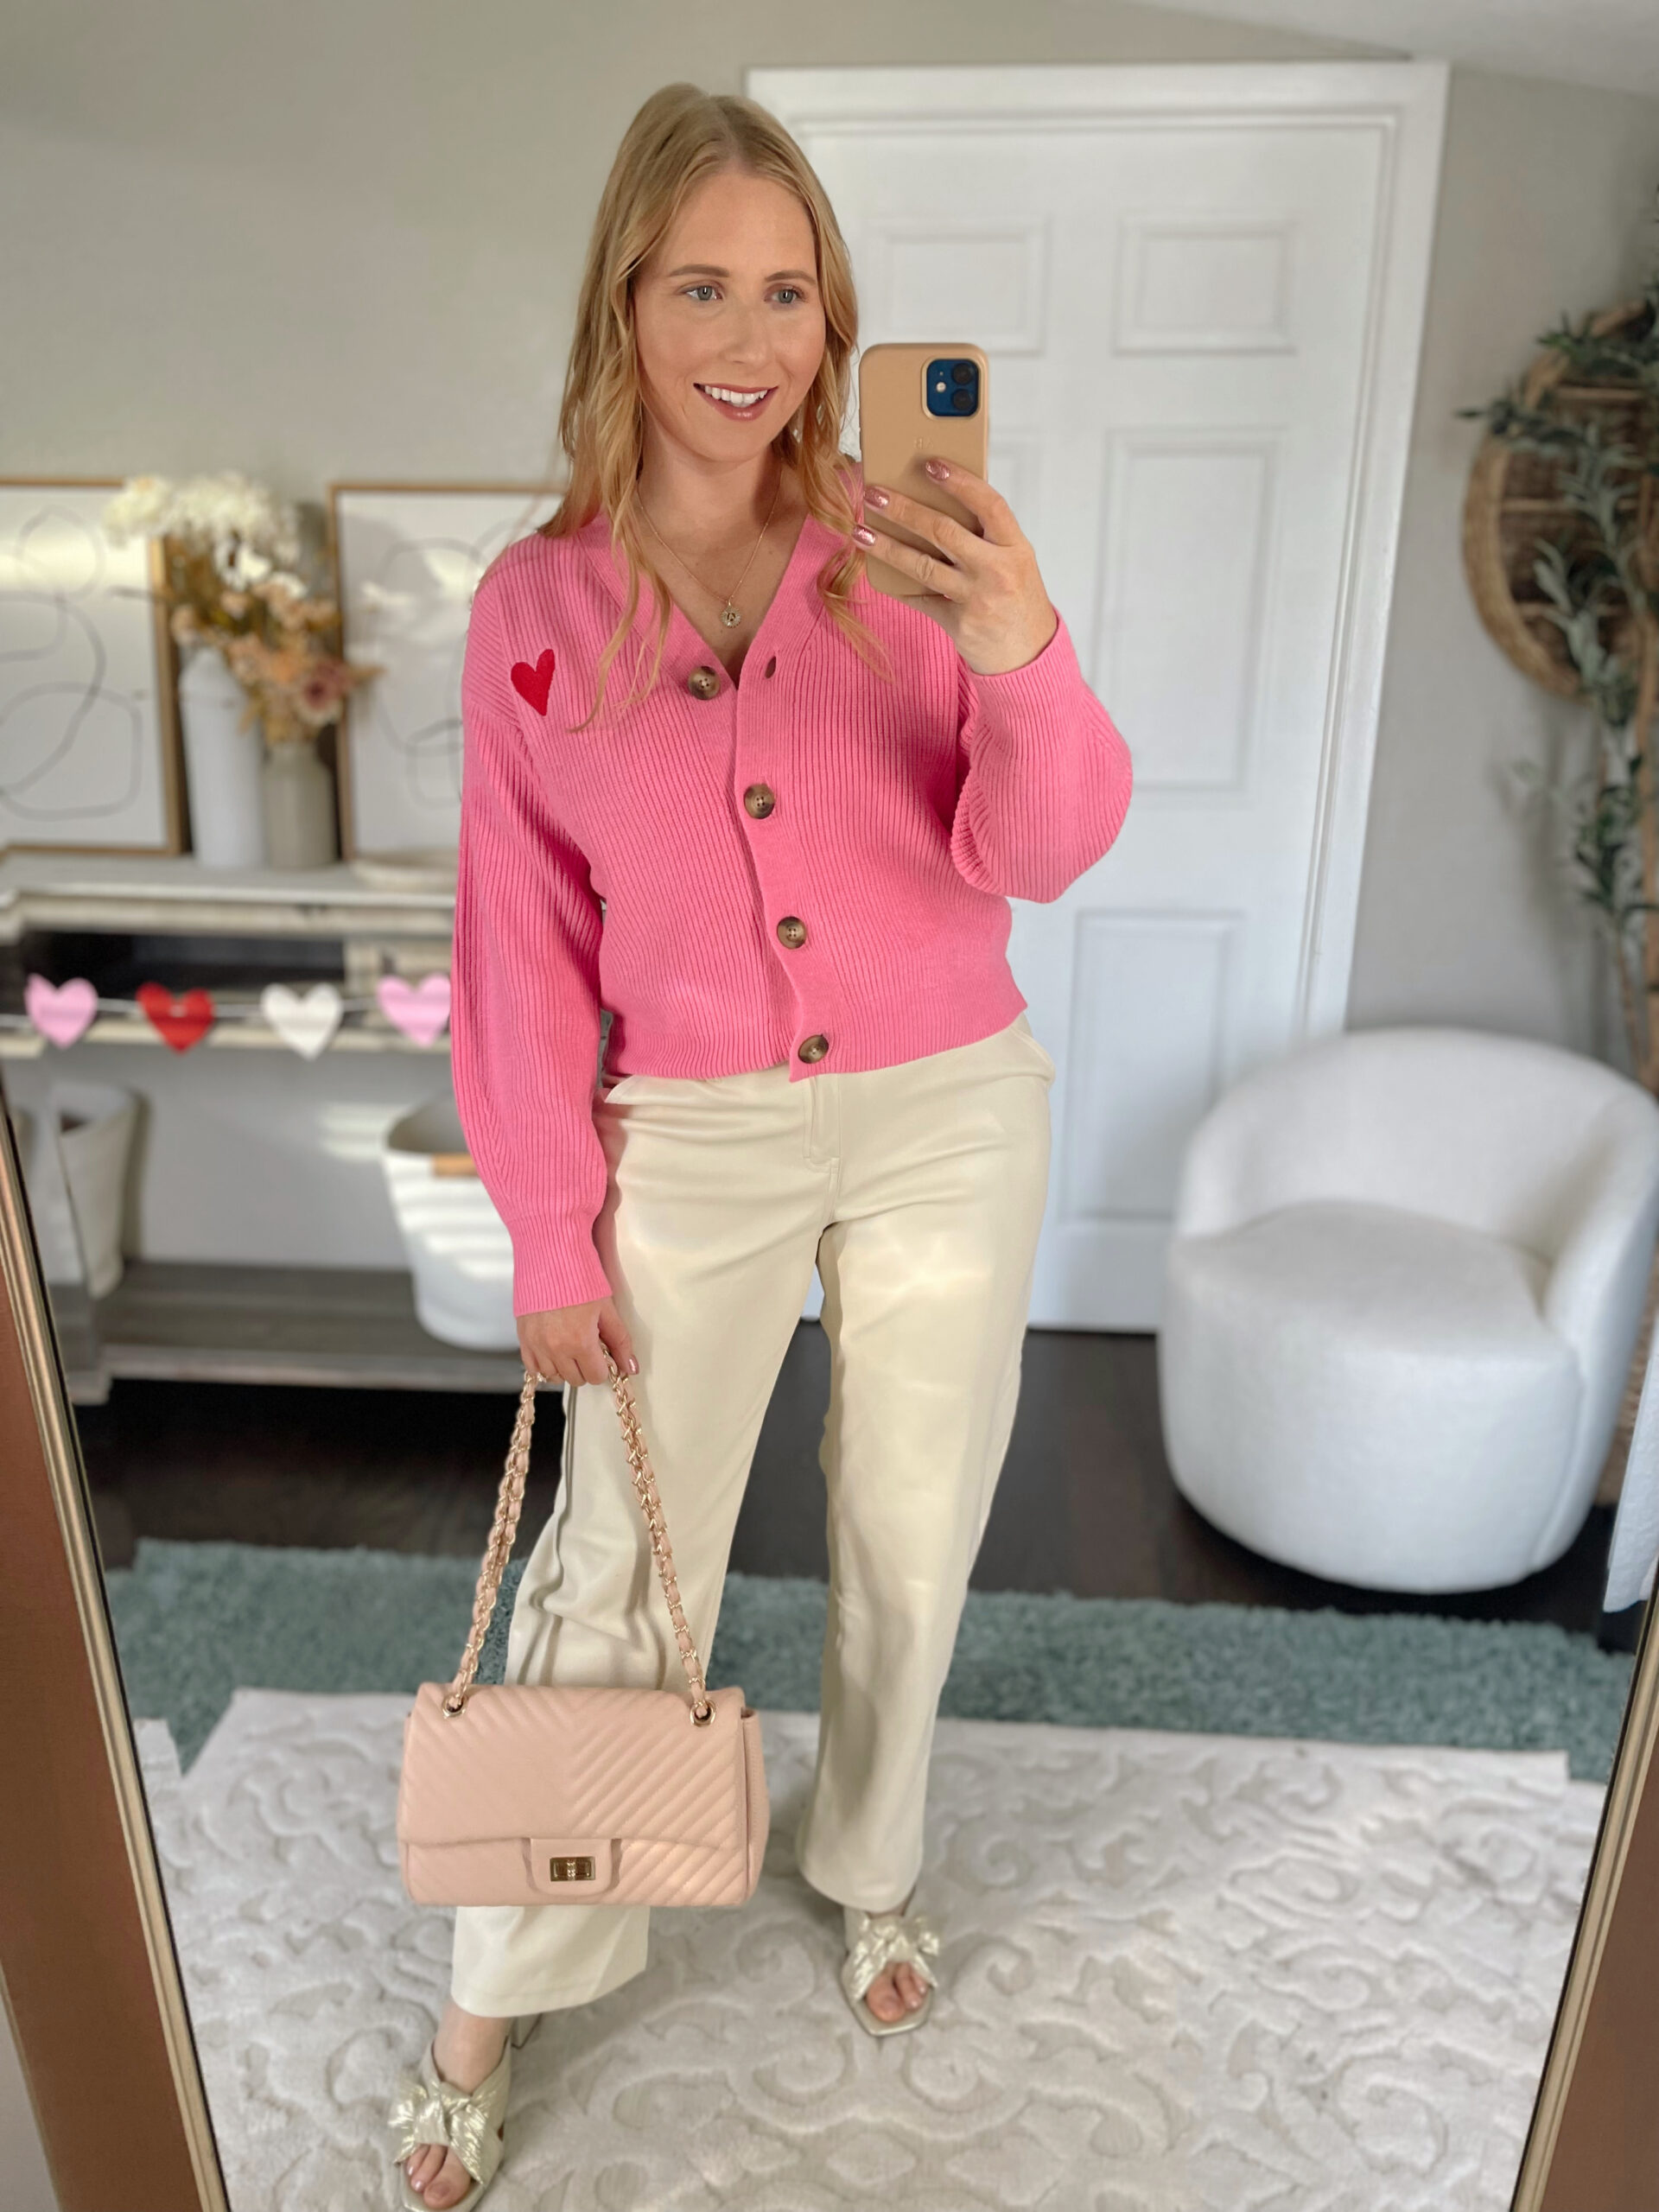 Hot Pink Outfit Ideas for 2023 - Affordable by Amanda